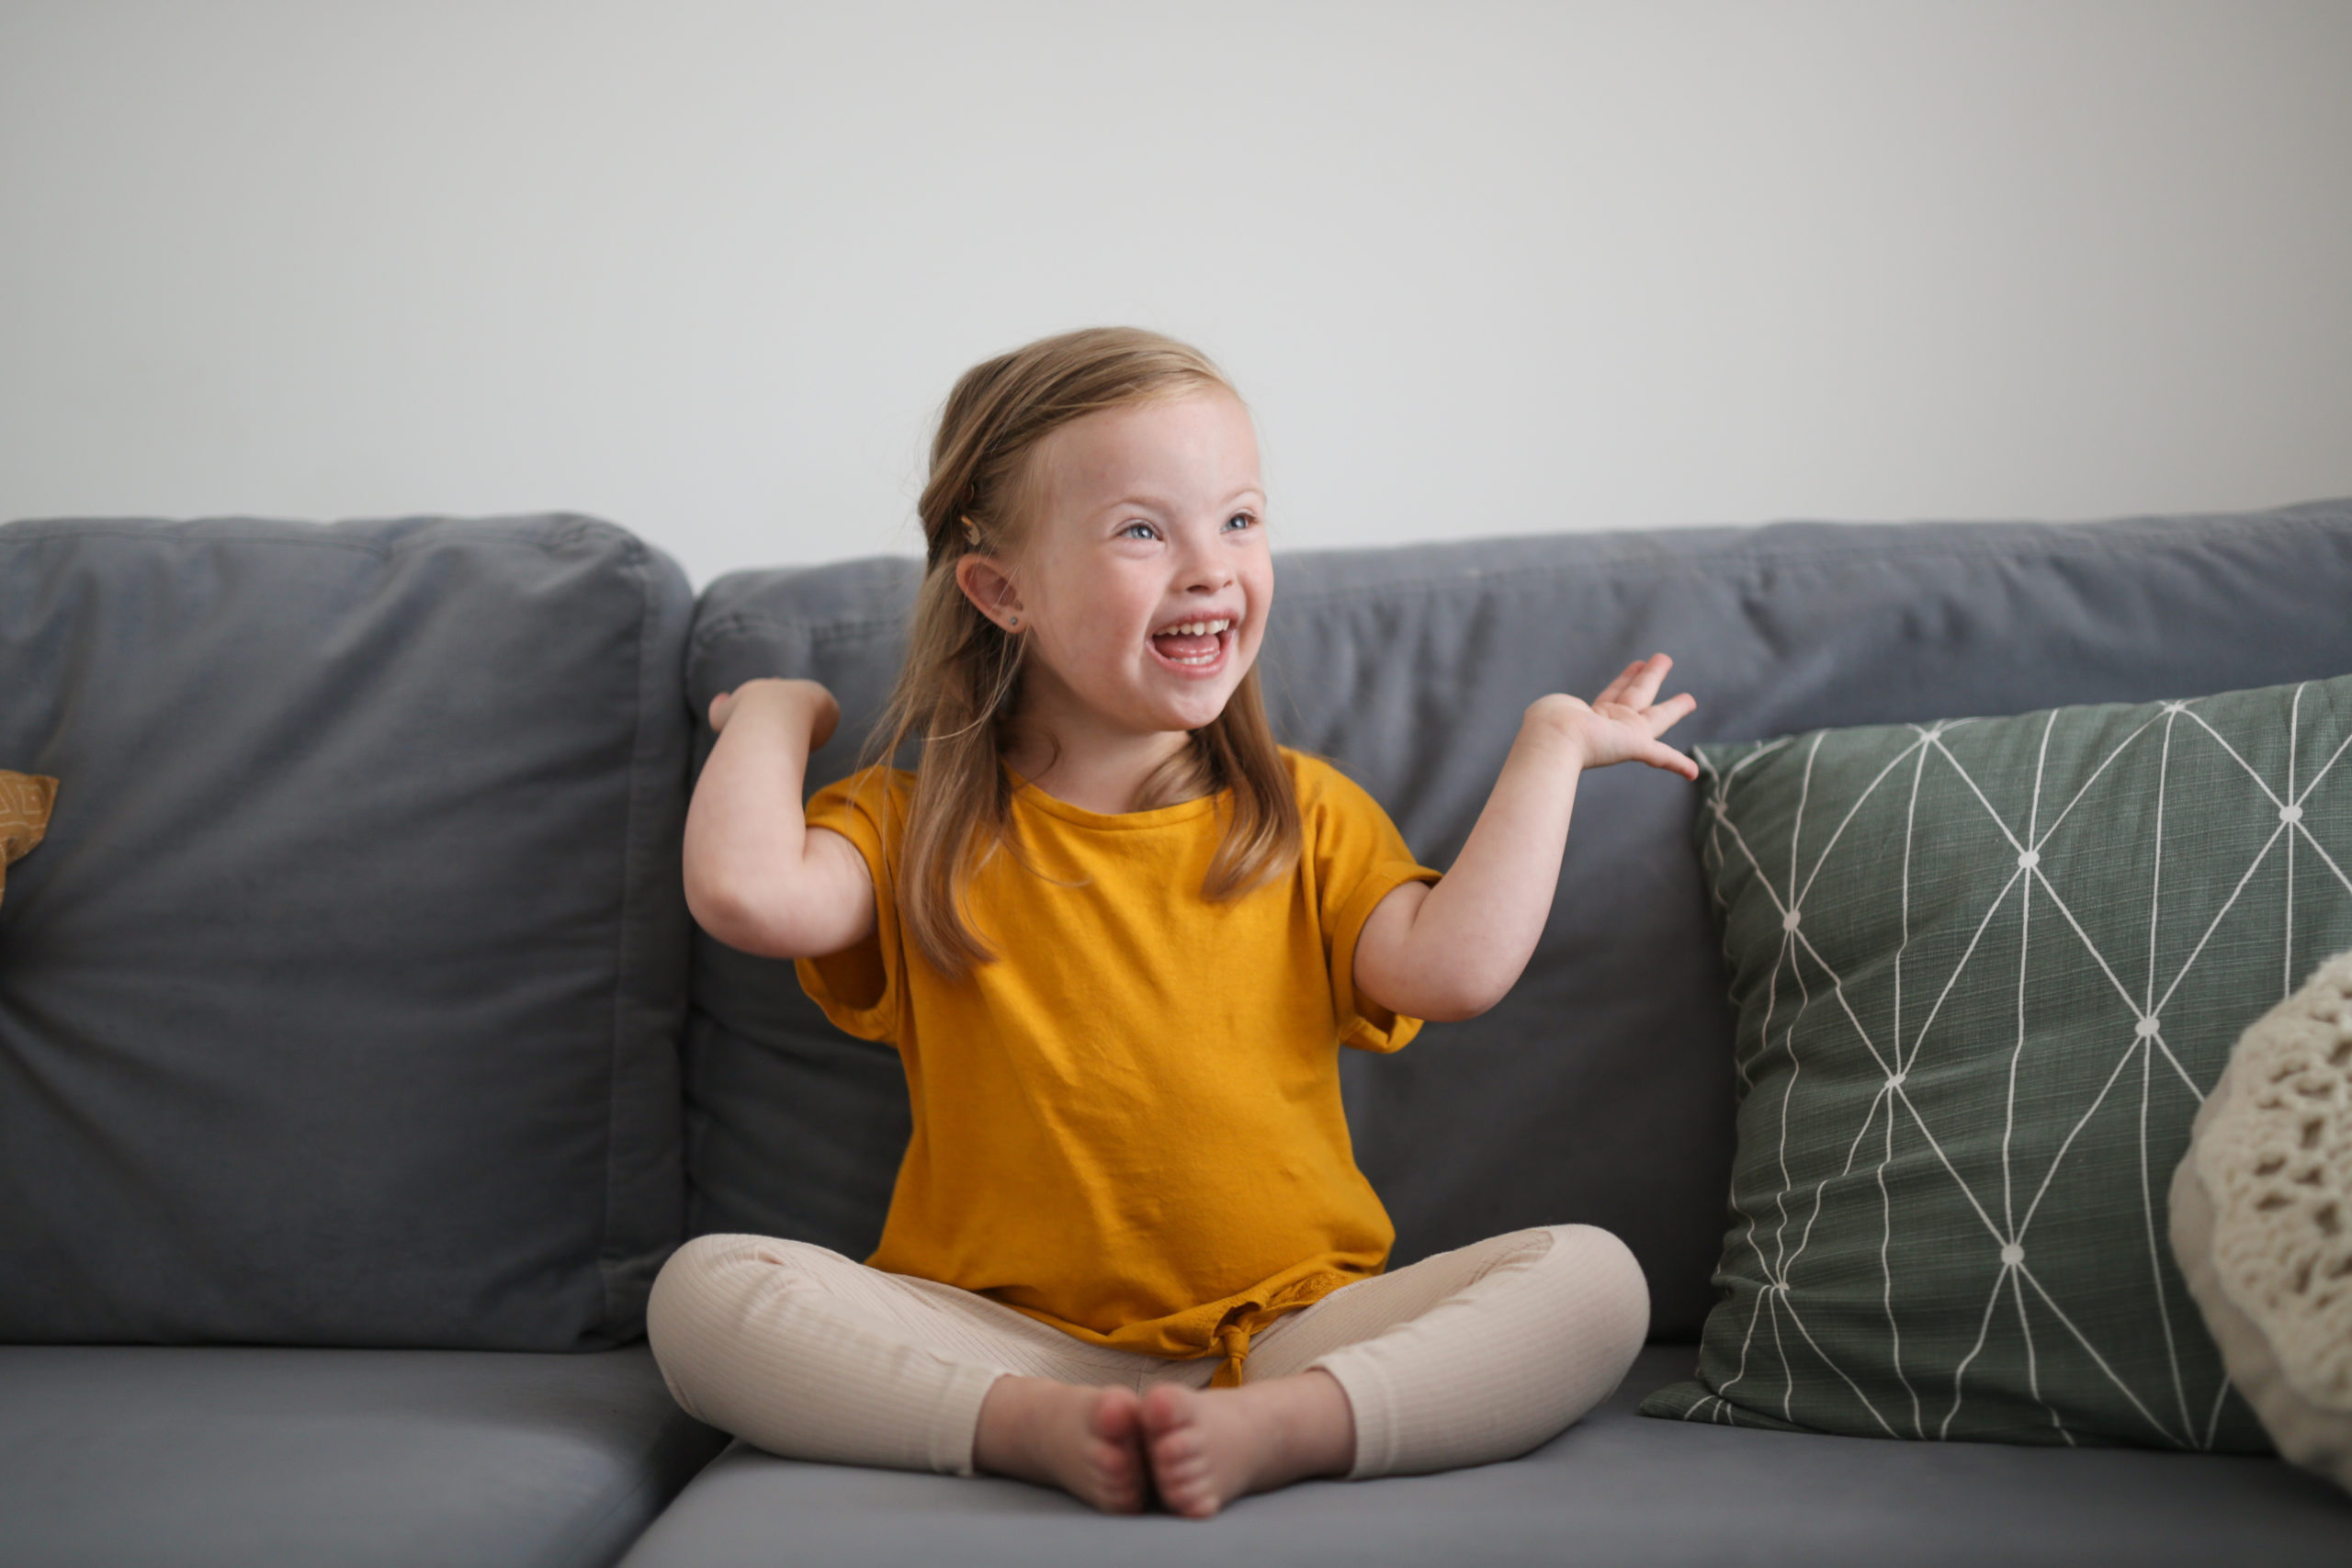 Image: 3 year old girl with Downs Syndrome, blonde hair, and yellow shirt sitting on a gray couch and smiling with hands in the air.